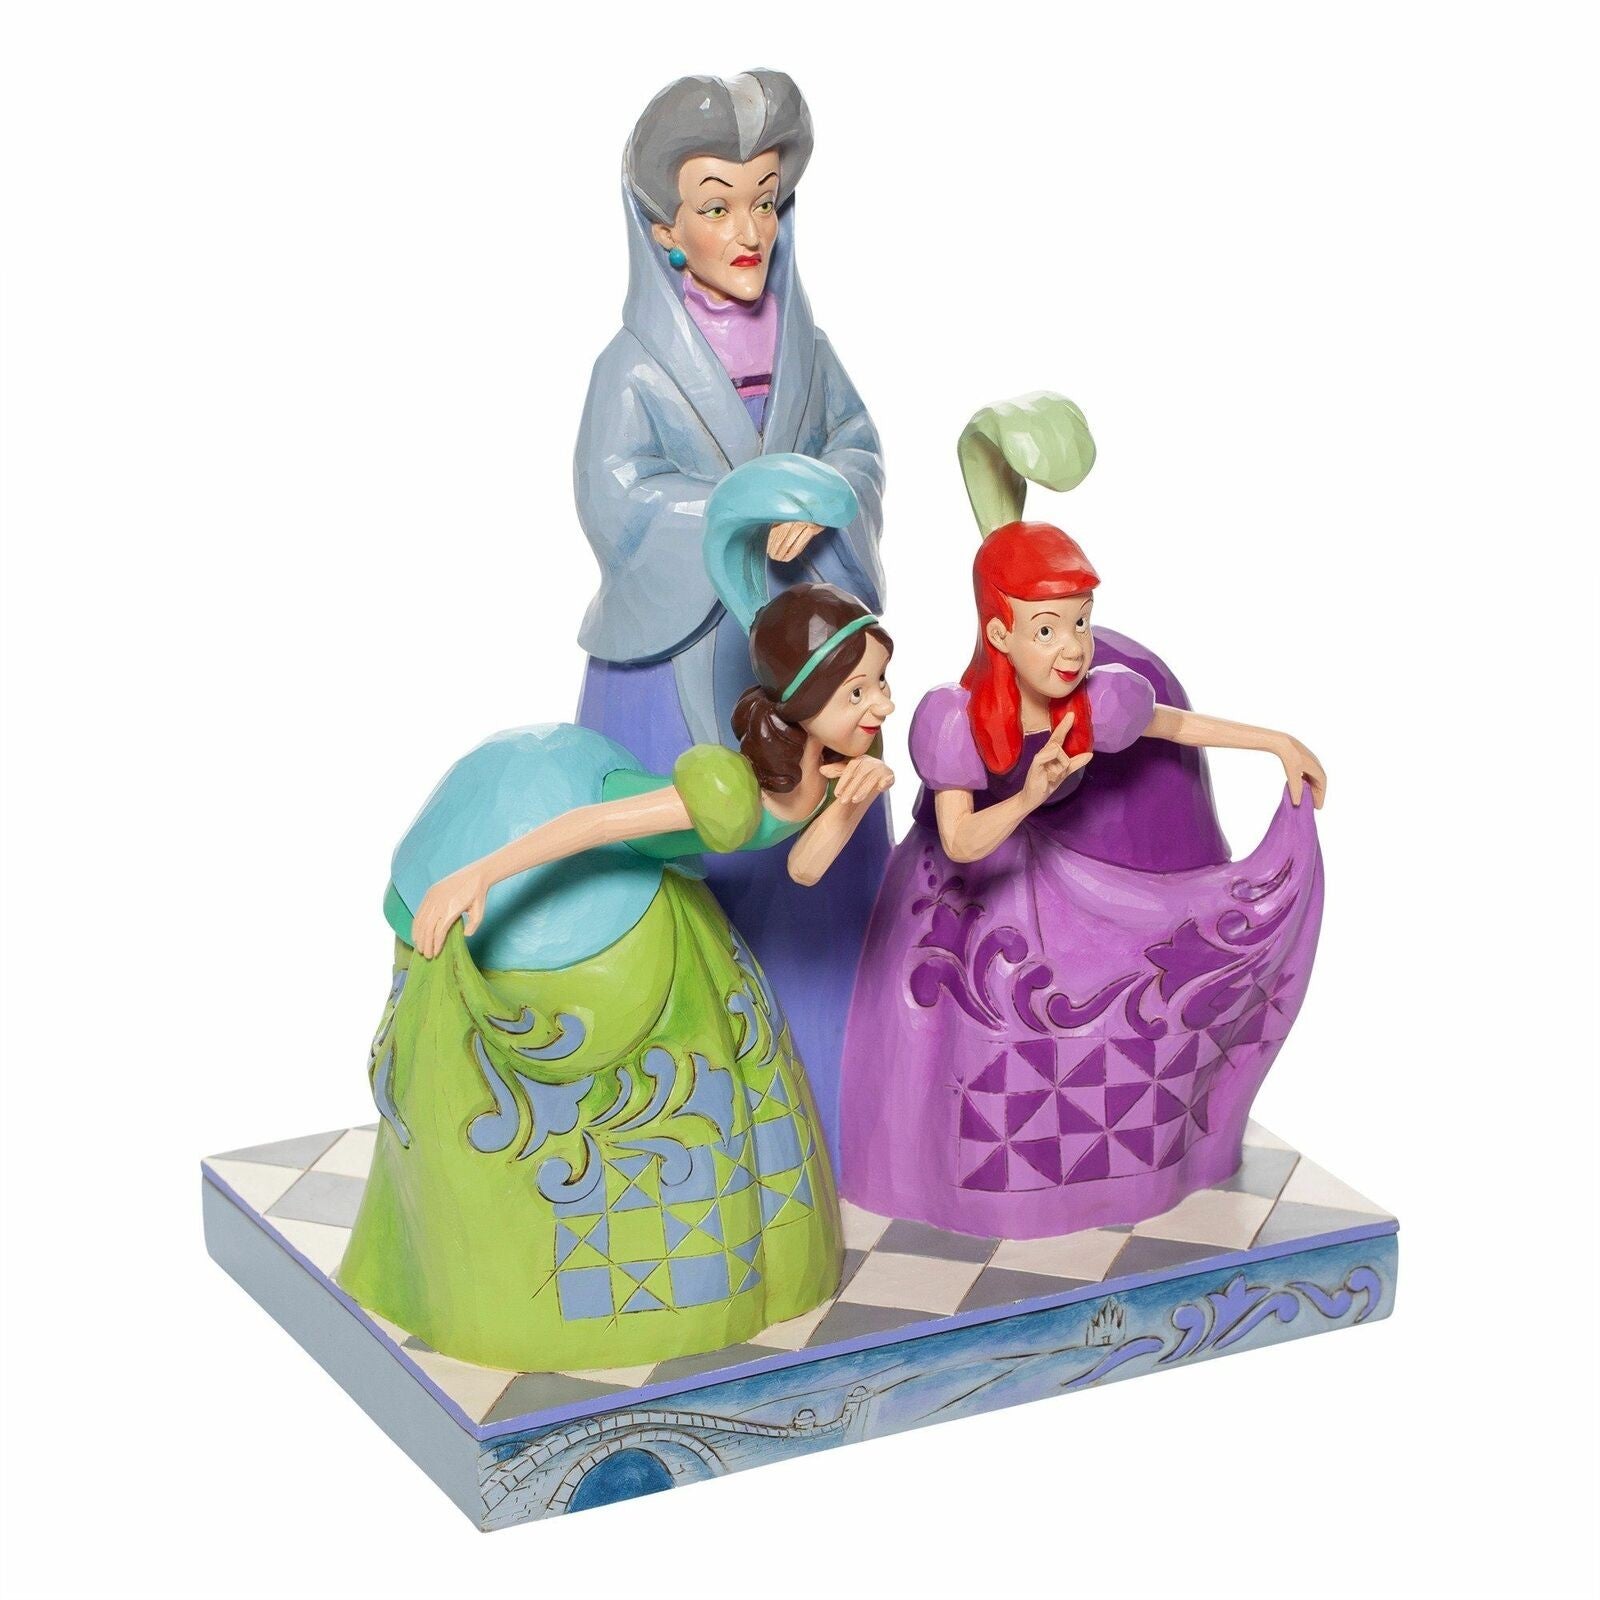 DISNEY TRADITIONS BY JIM SHORE LADY TREMAINE, ANASTASIA AND DRIZELLA STEP SISTERS CINDERELLA 21CM